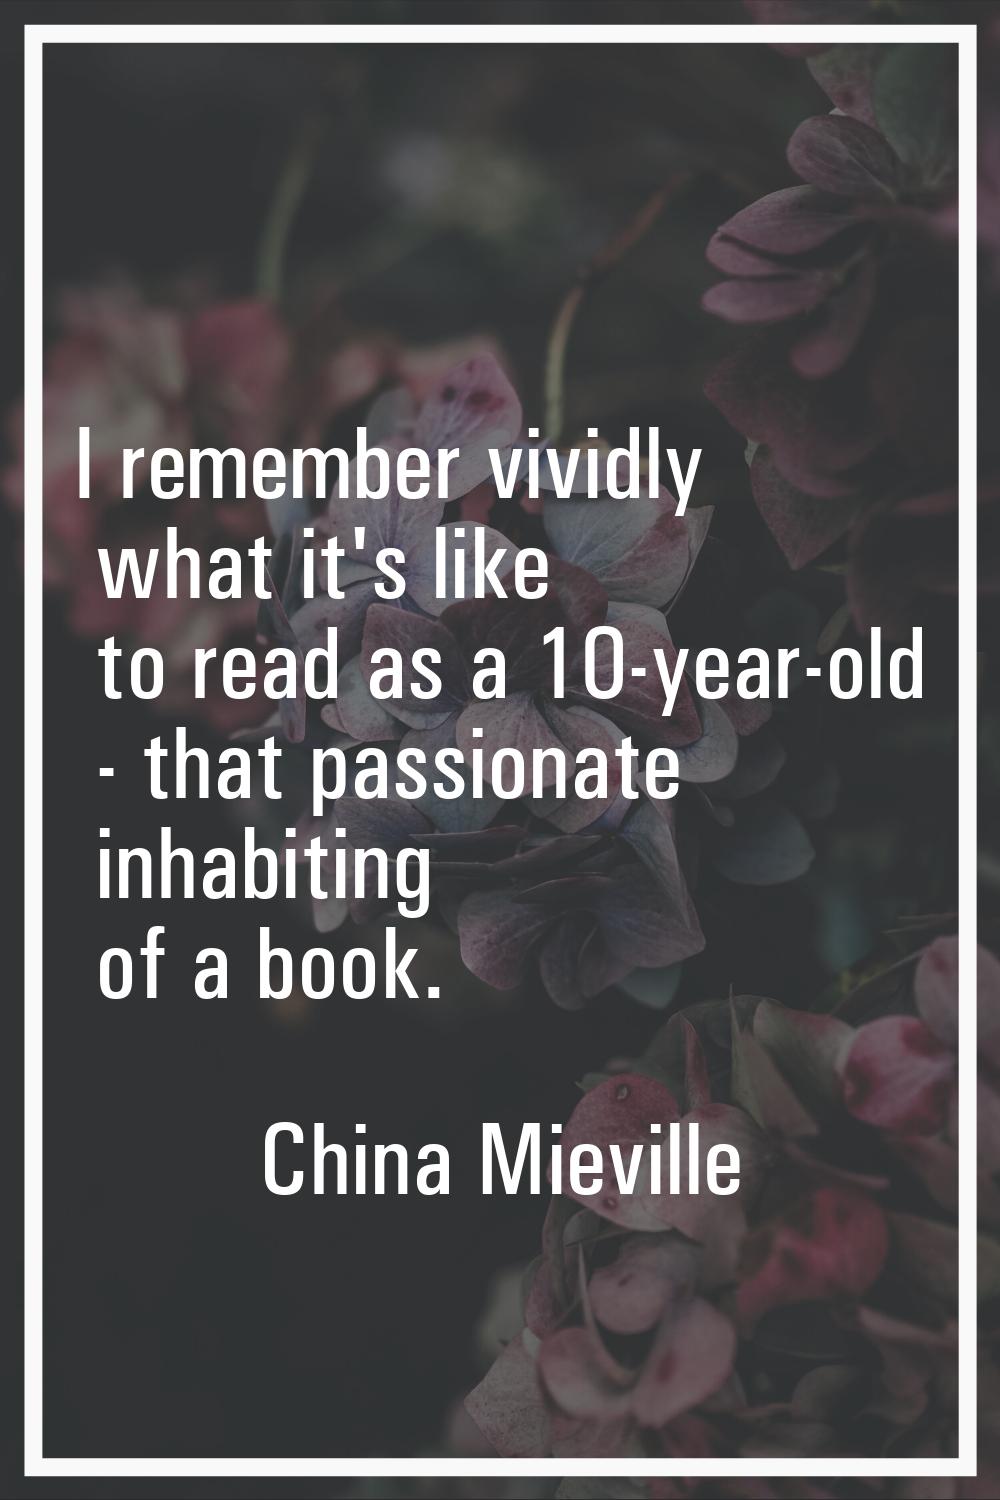 I remember vividly what it's like to read as a 10-year-old - that passionate inhabiting of a book.